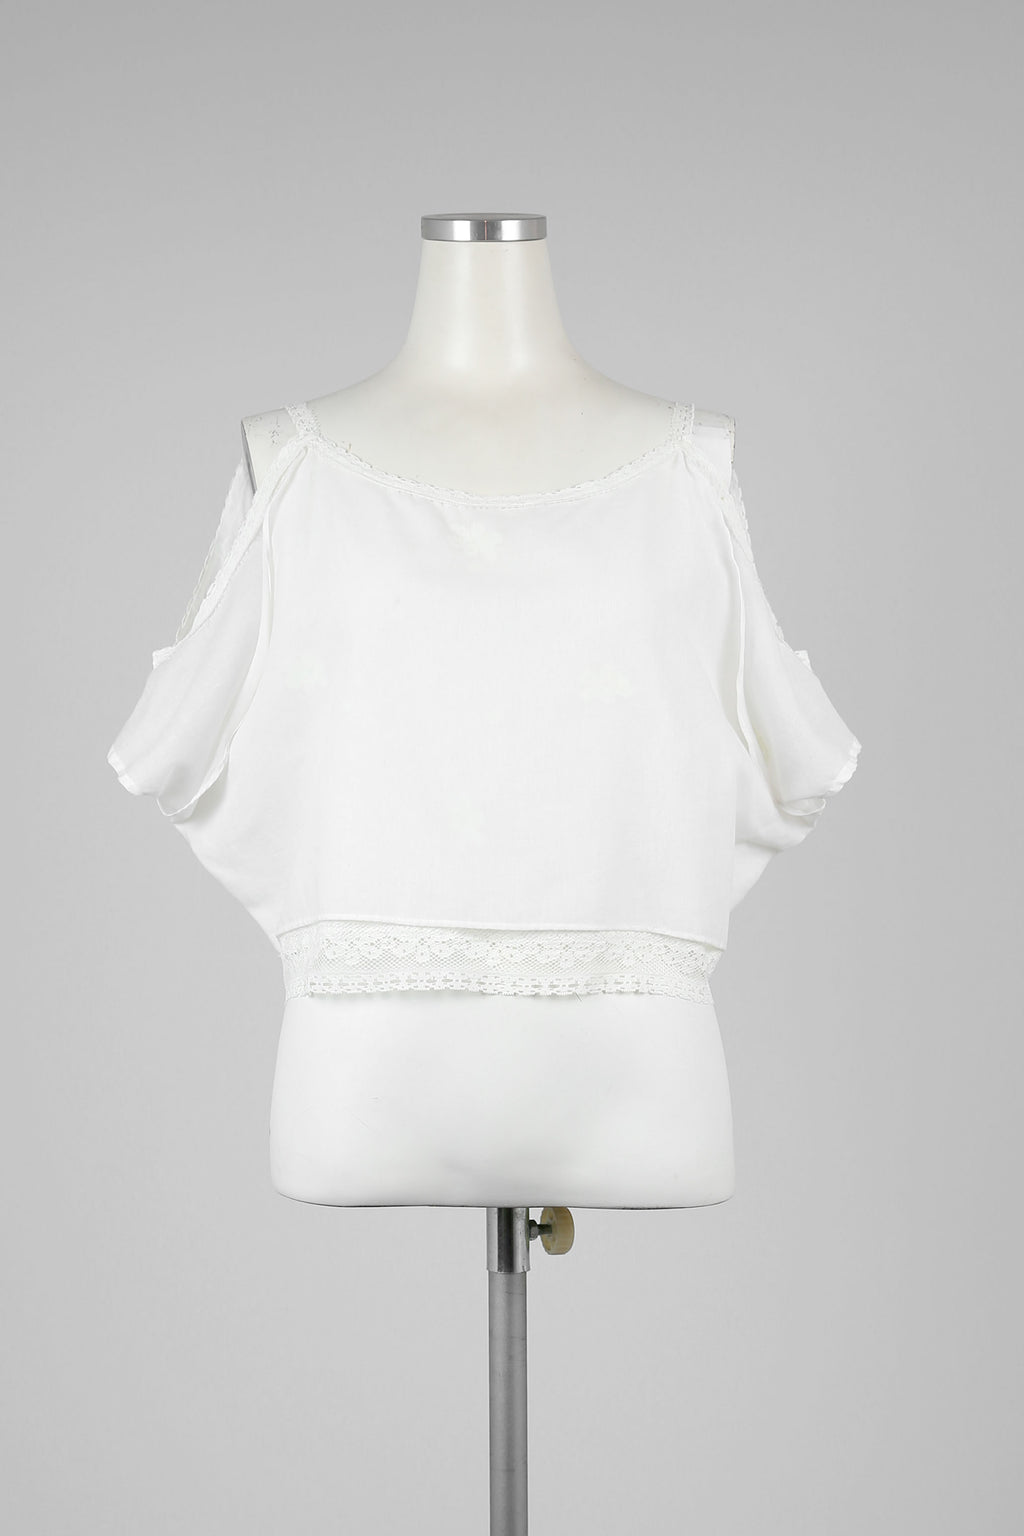 White Layered Crop Top - Tae With Jane NY